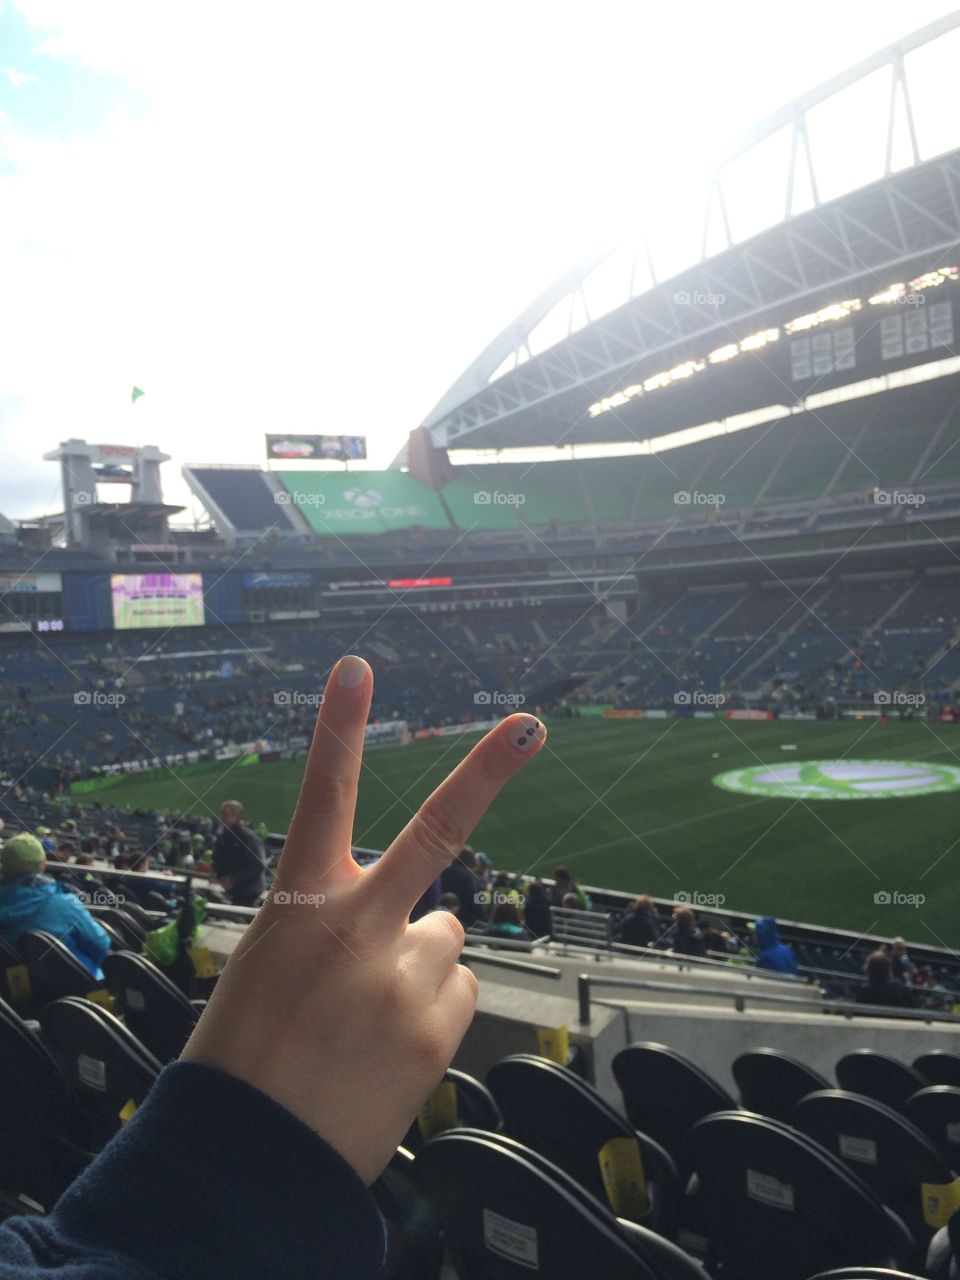 A peace sign at a sports stadium